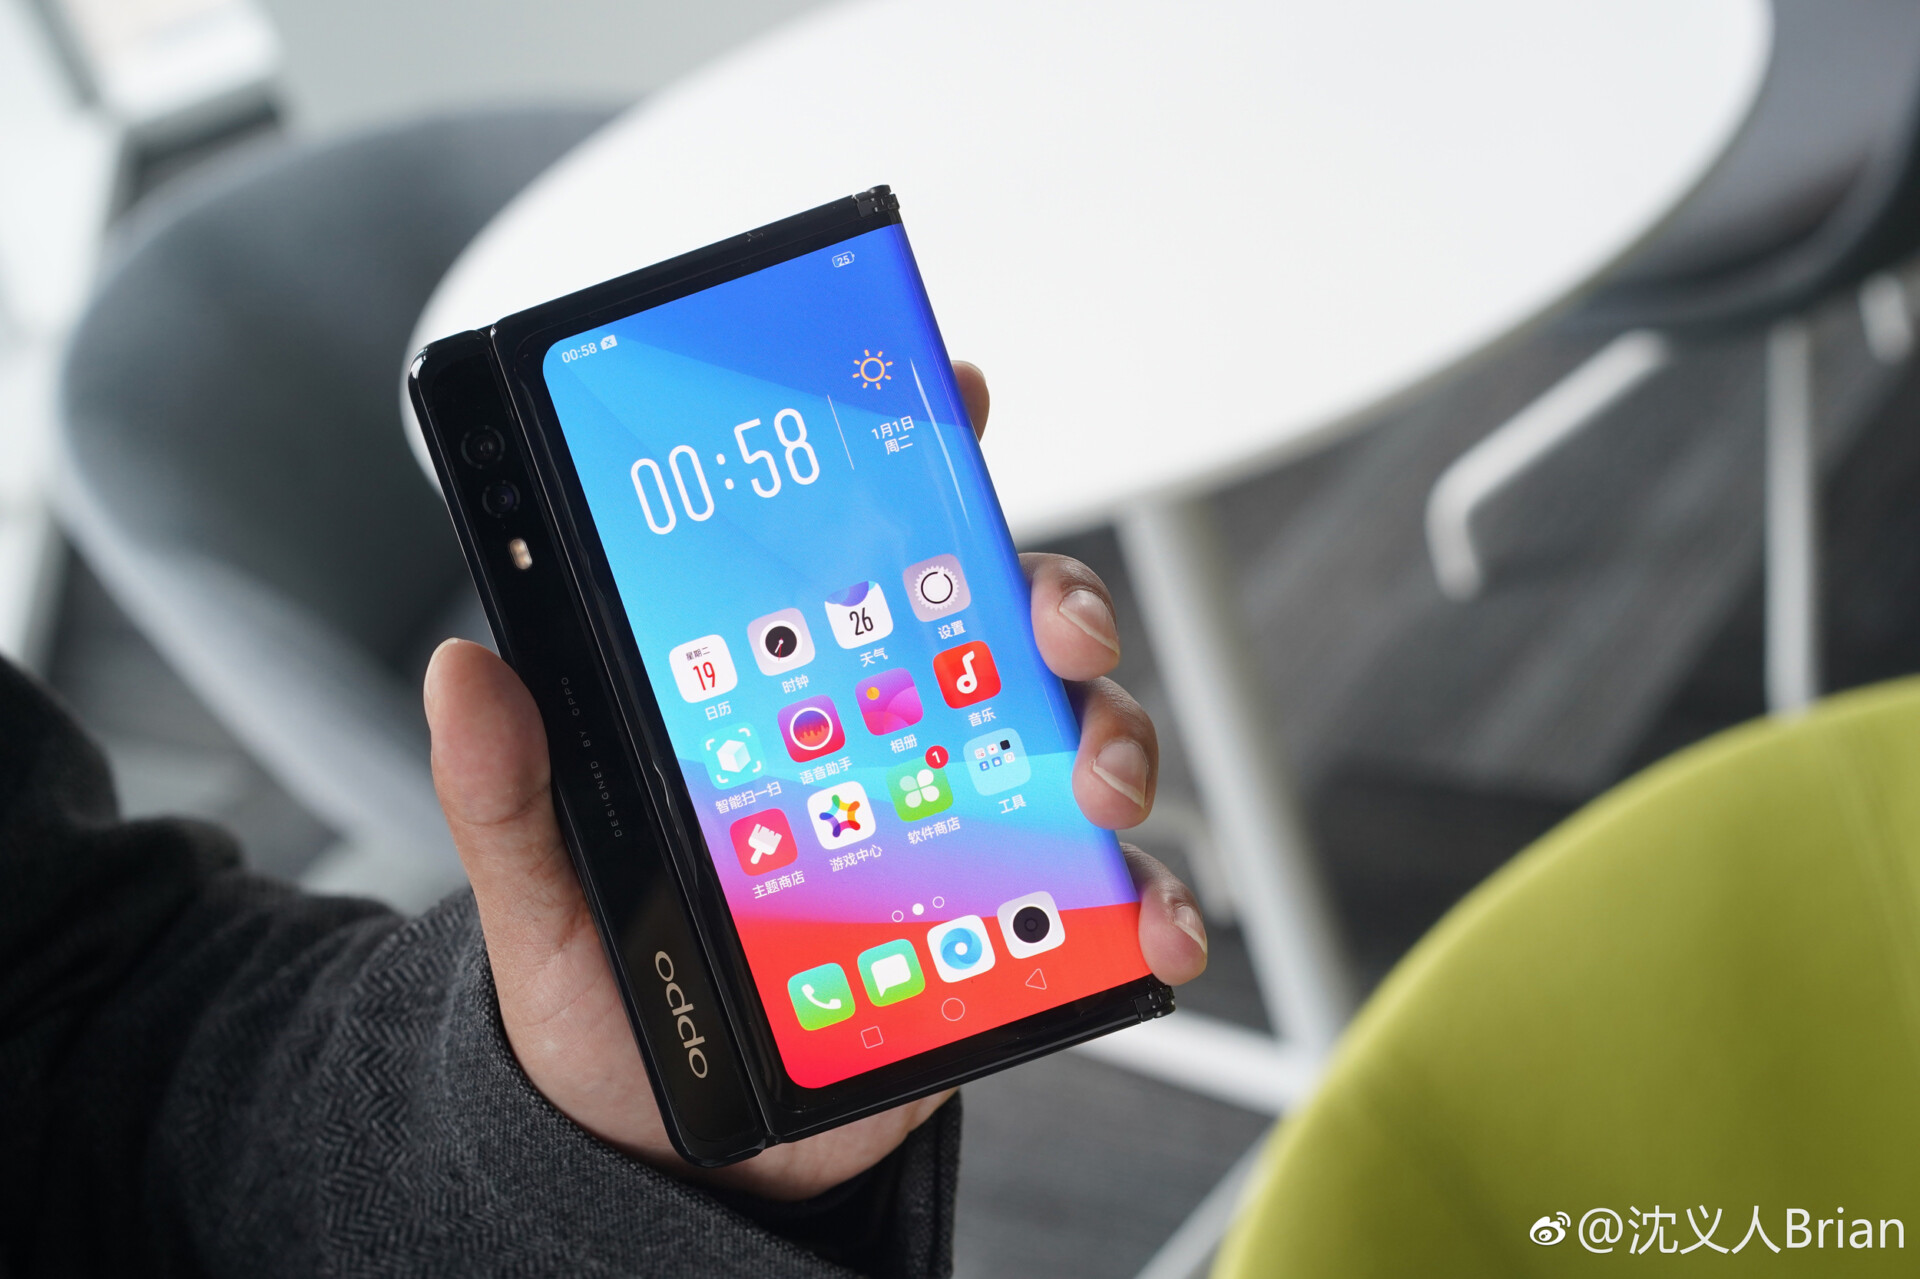 A photo of Oppo's foldable smartphone.